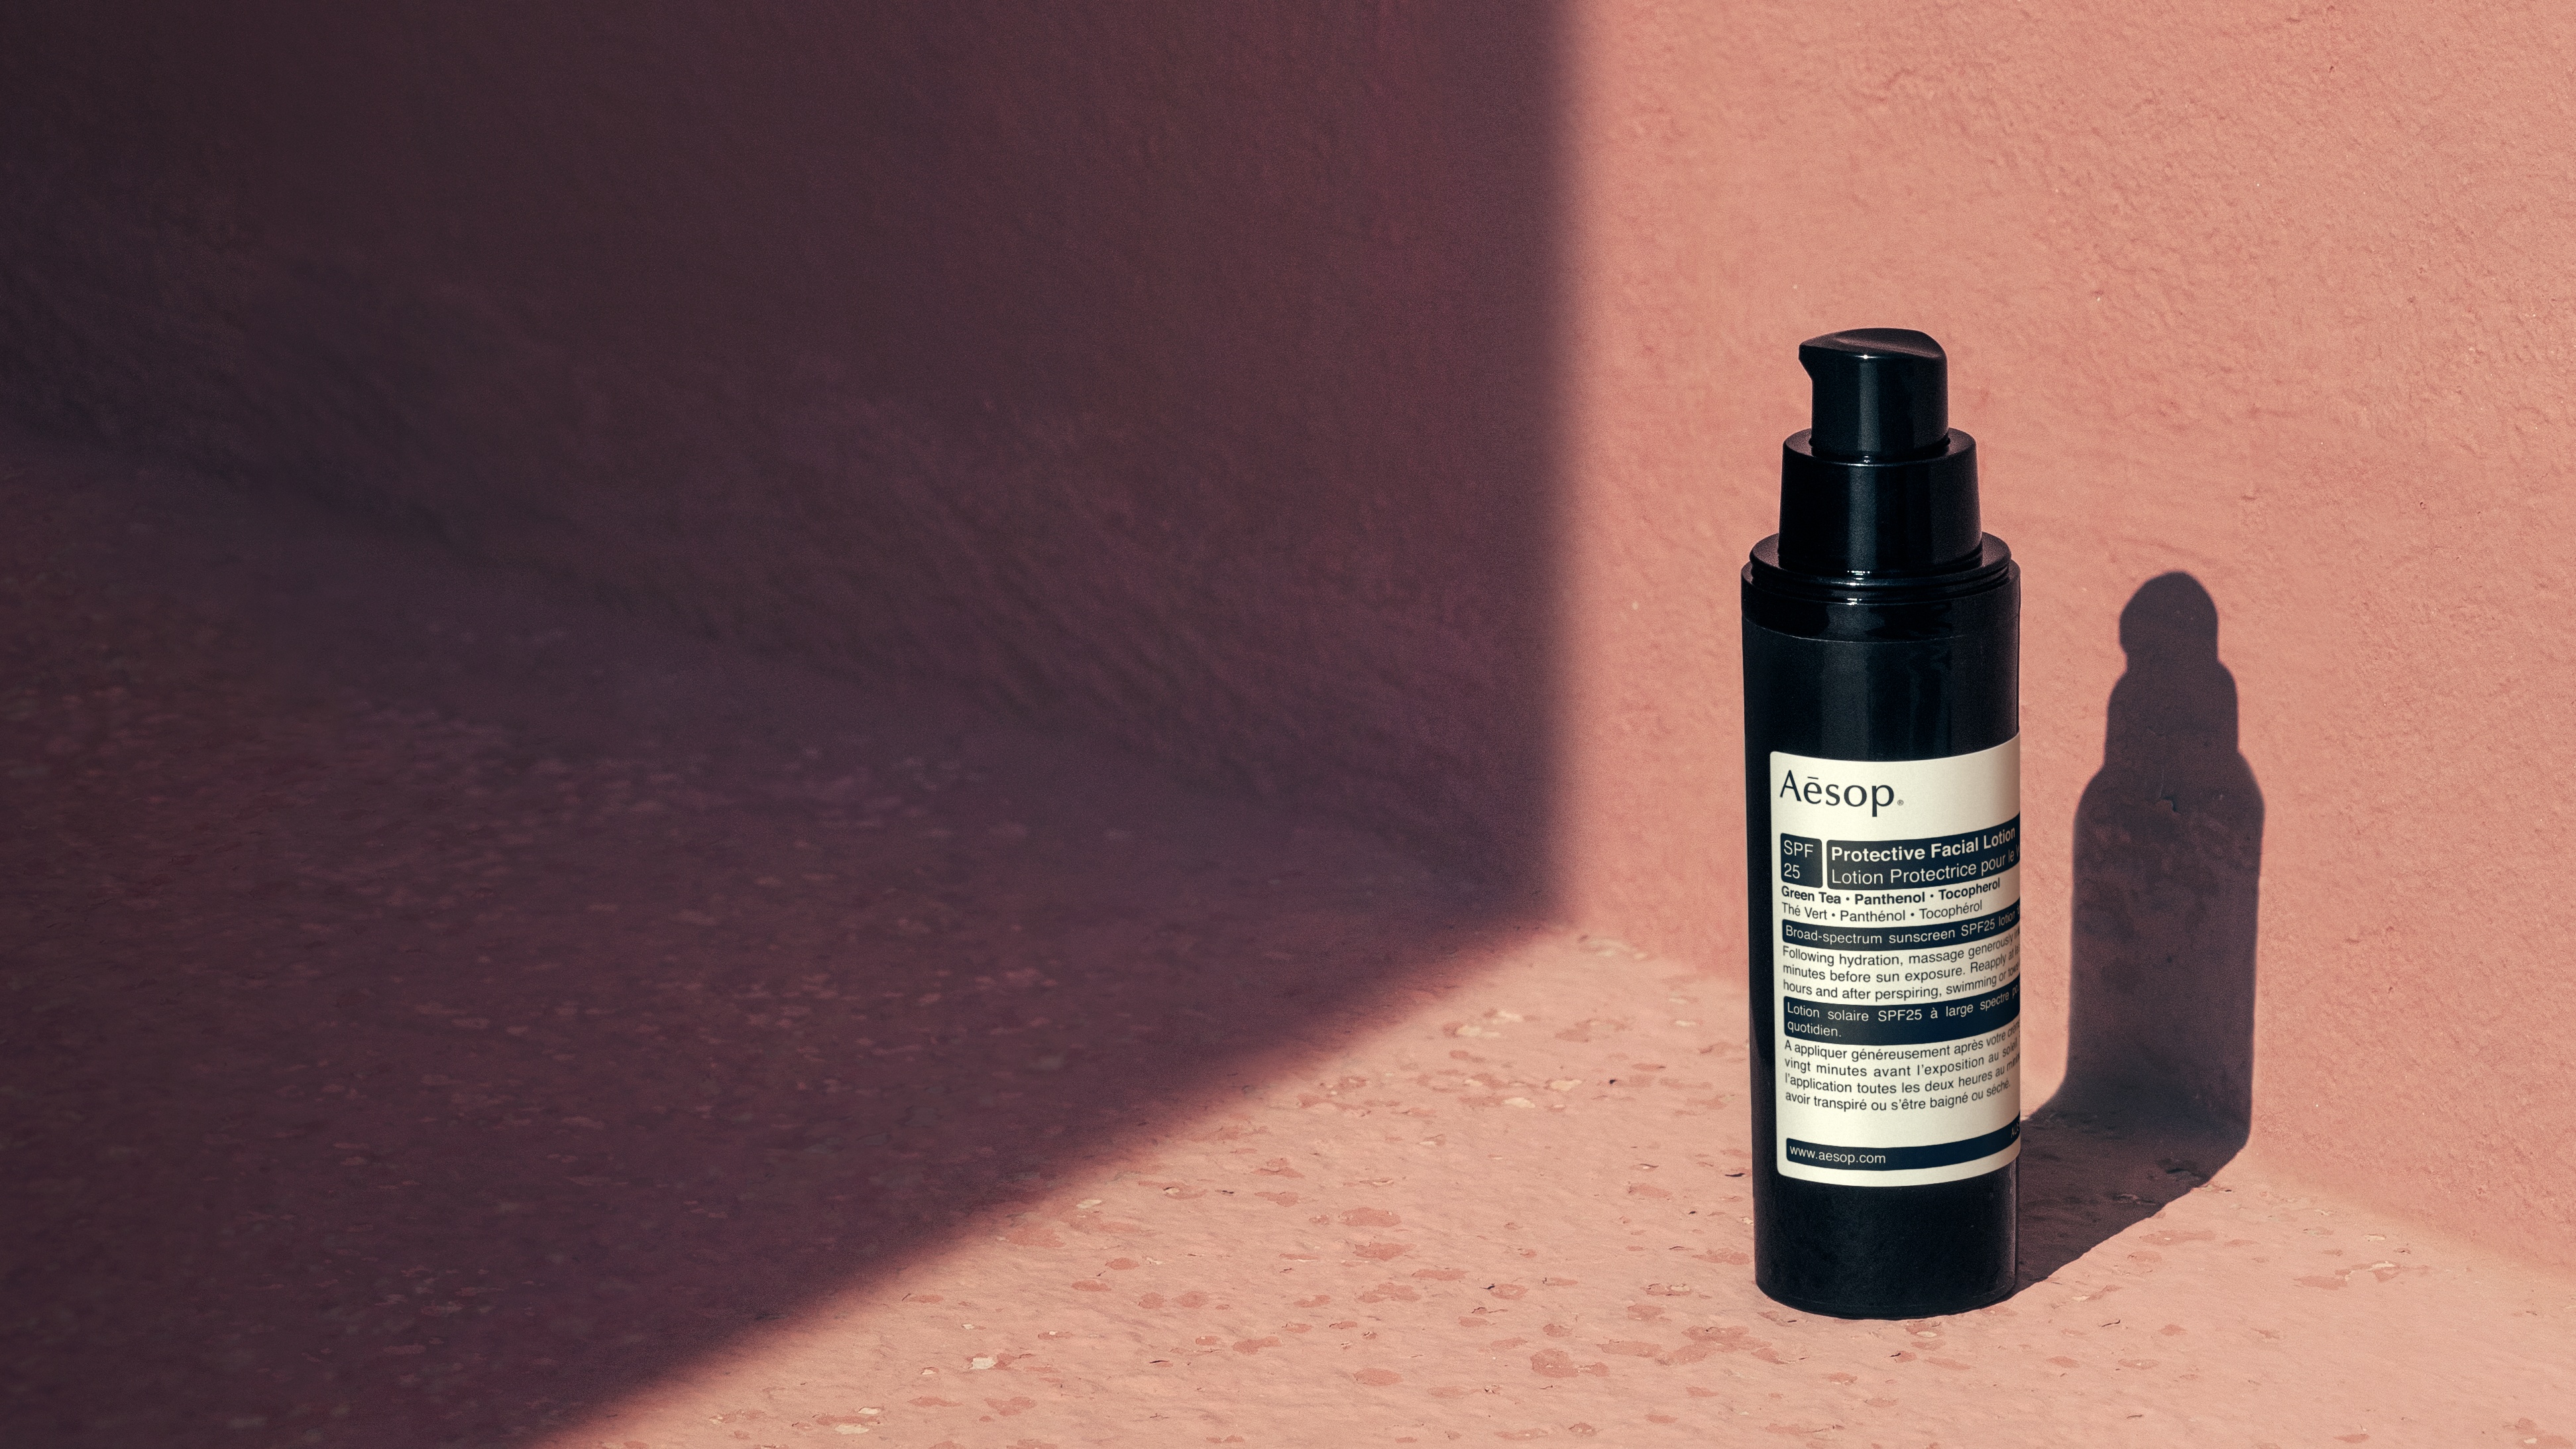 Give SPF-Protected Face With Aesop's New Facial Lotion Grazia